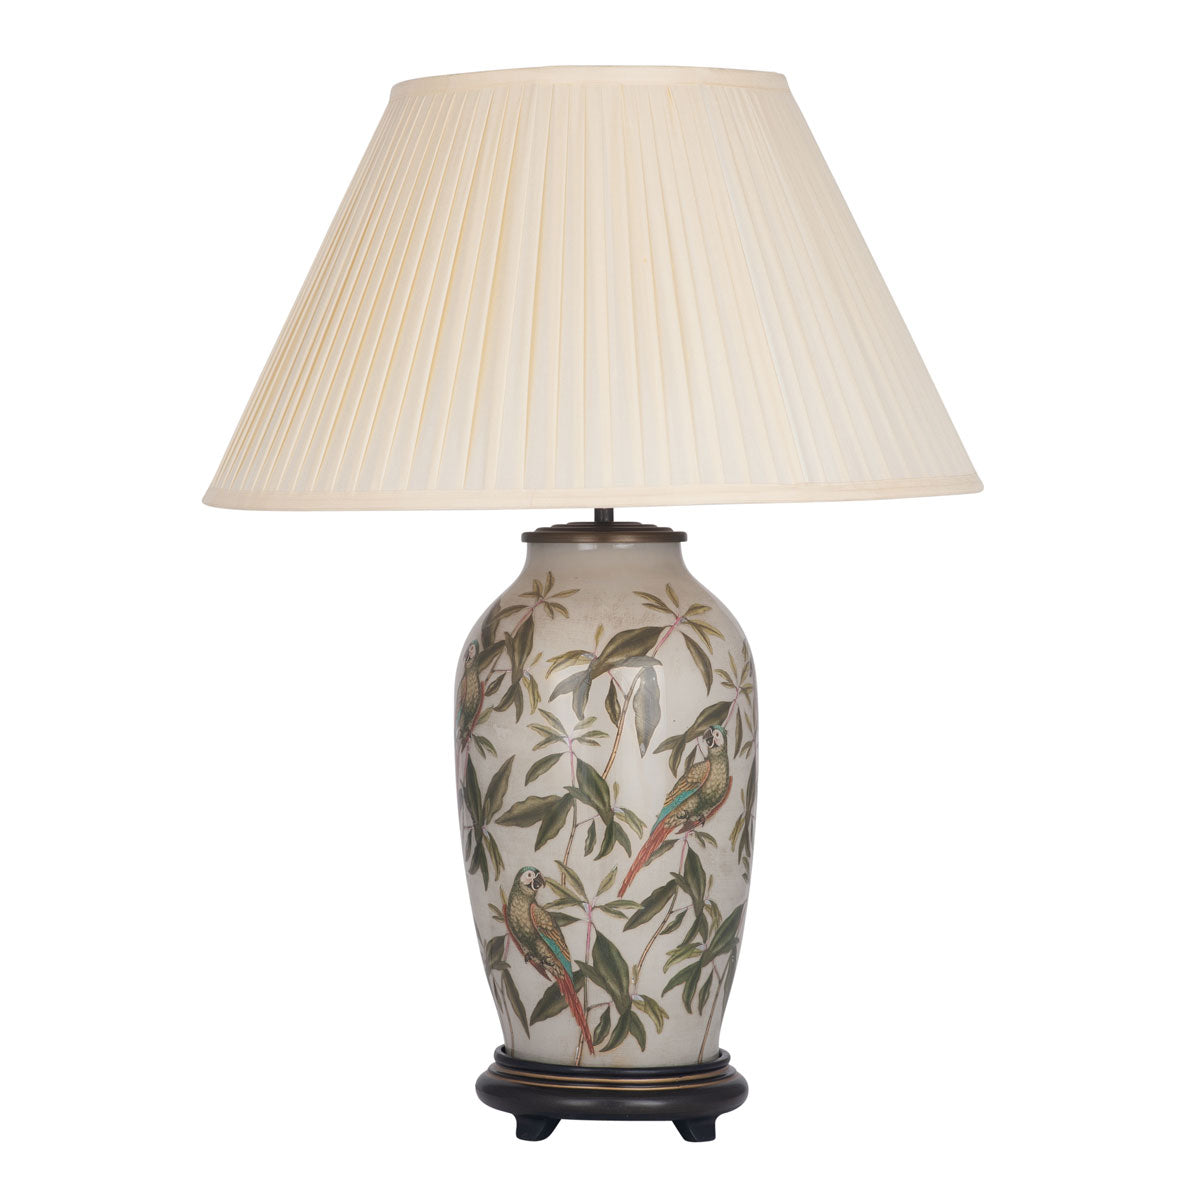 Parrot table lamp with empire style lampshade